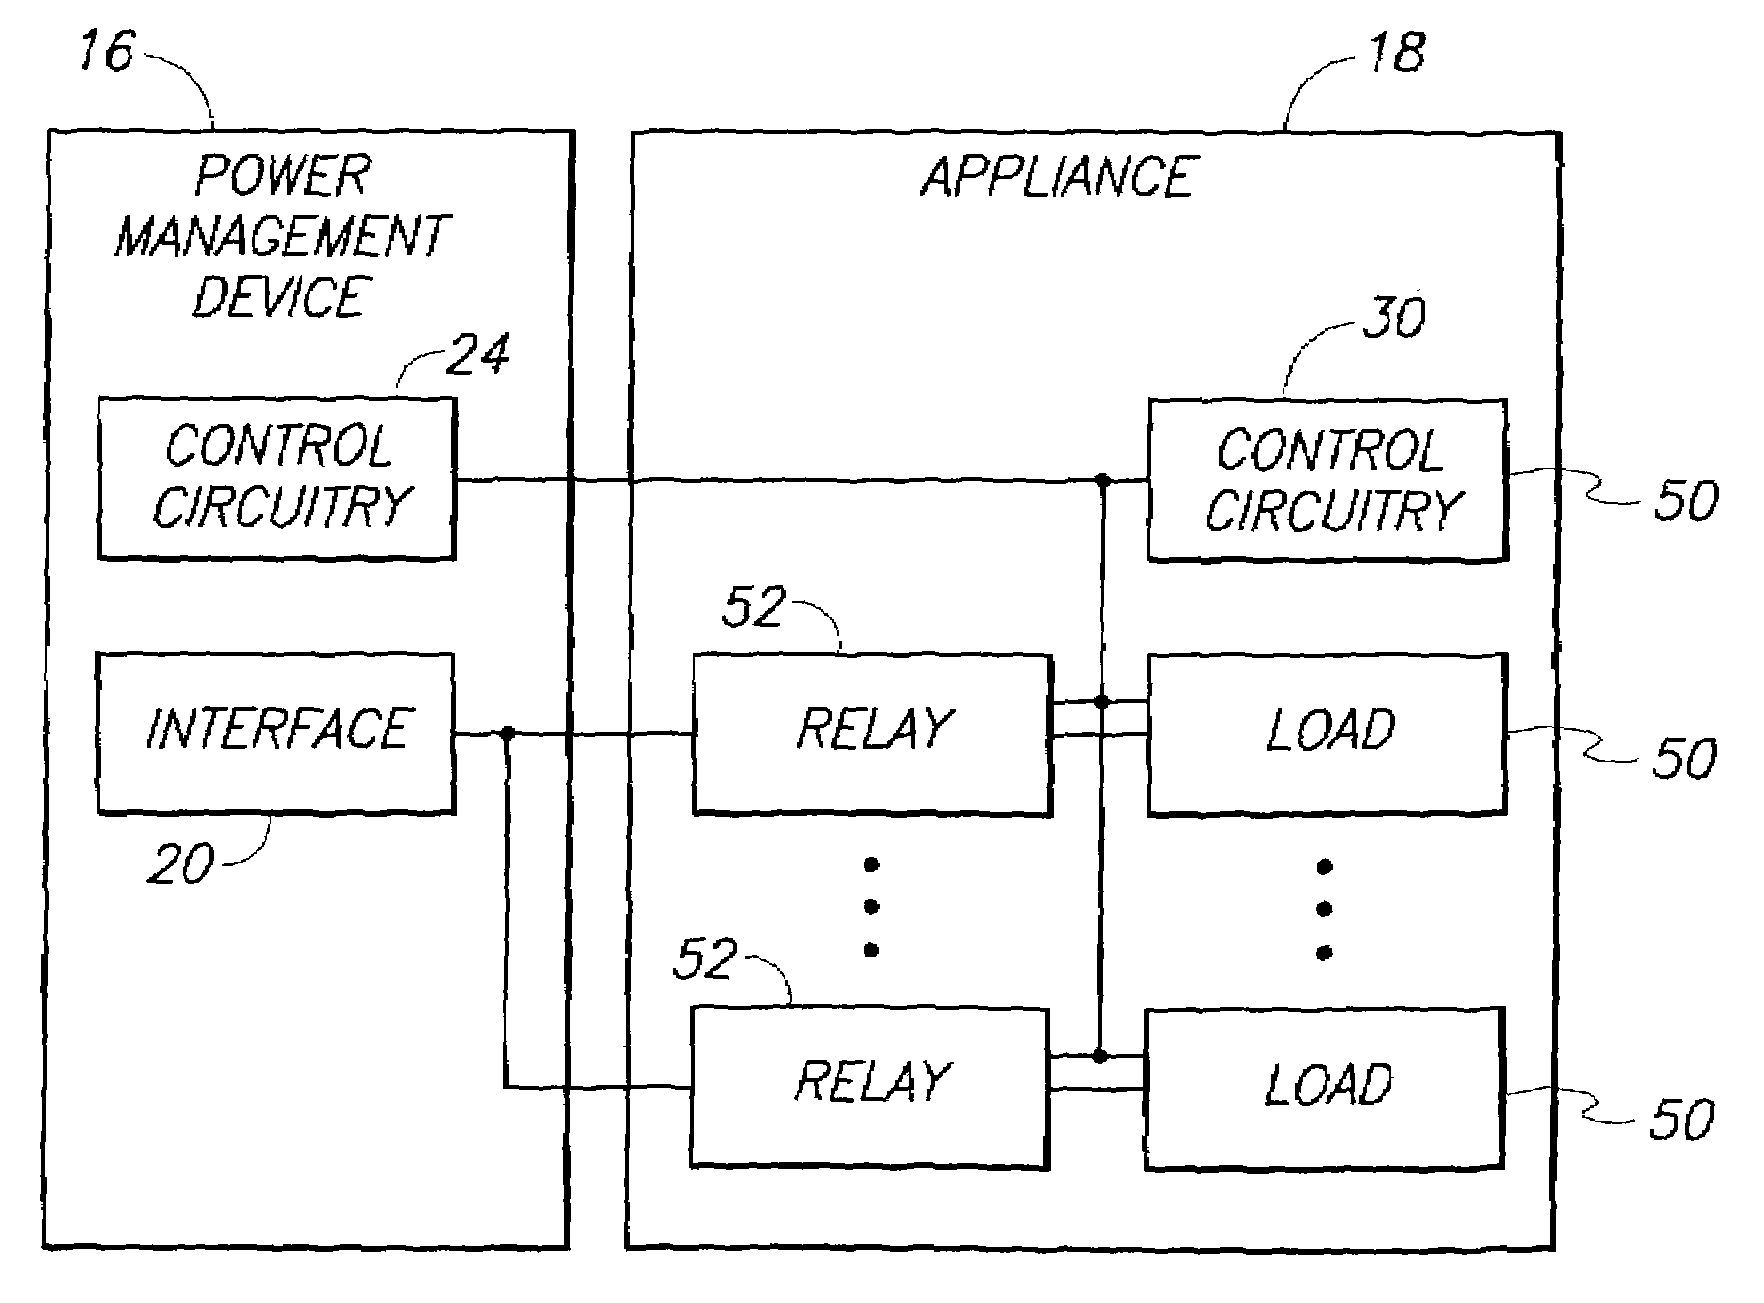 Electrical appliance energy consumption control methods and electrical energy consumption systems